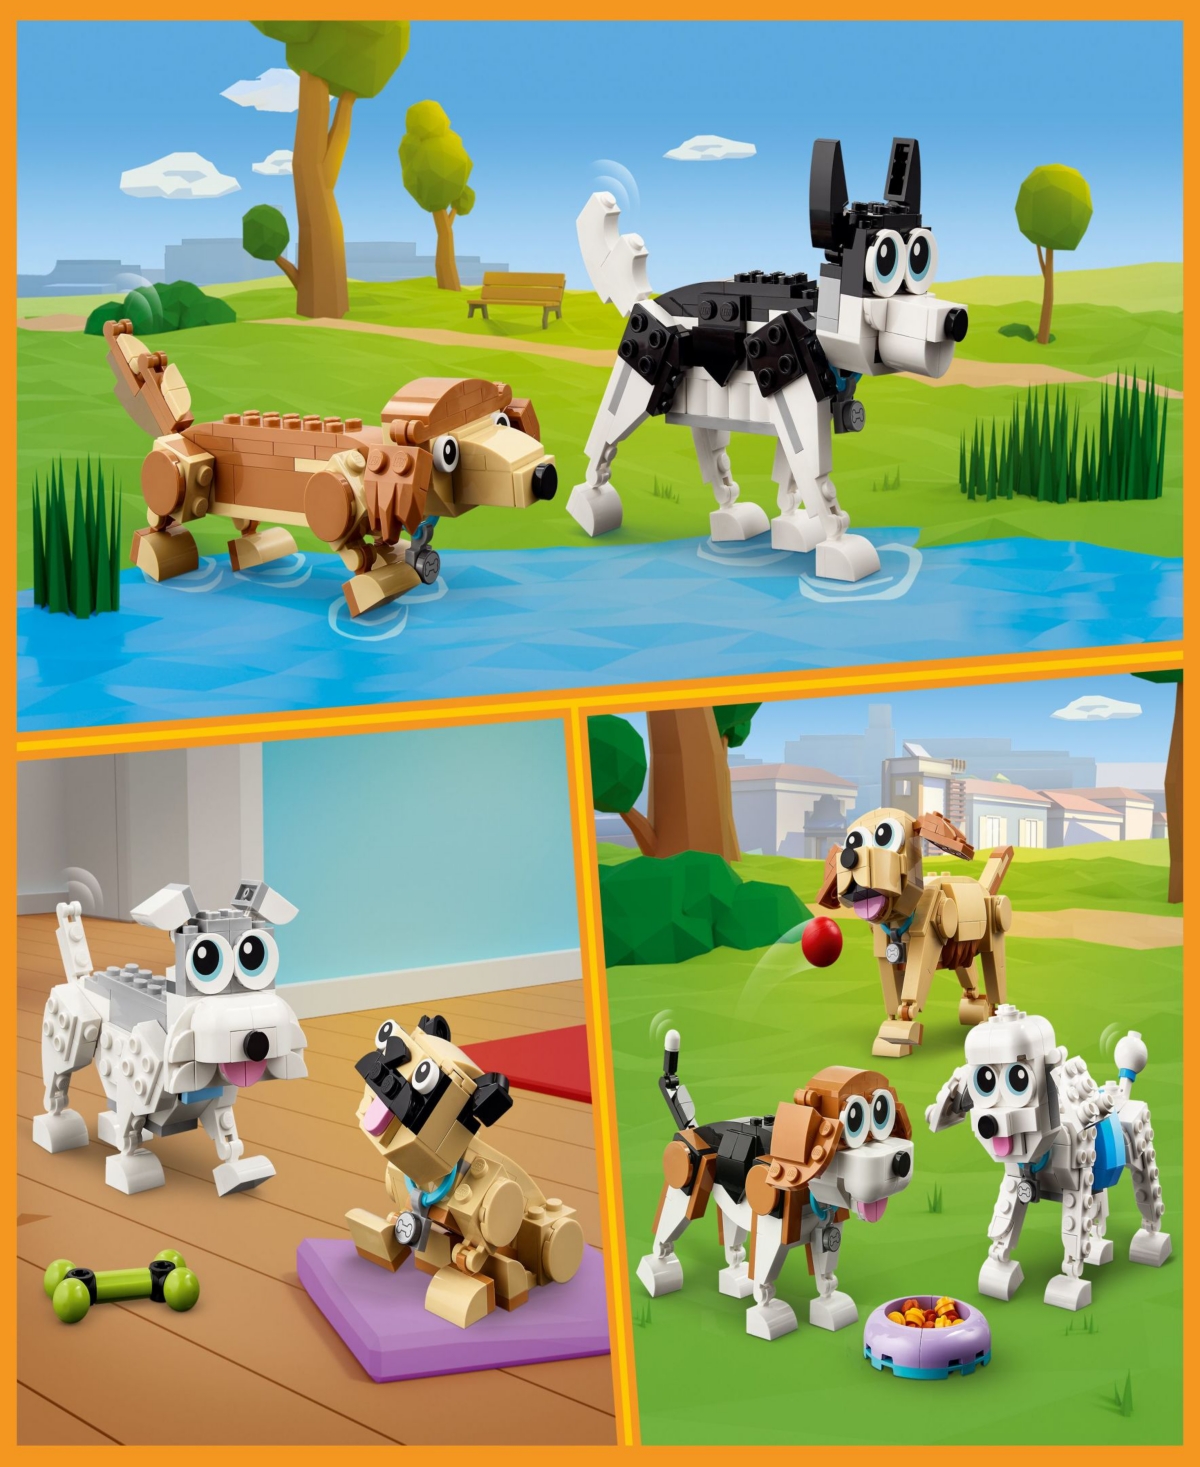 Shop Lego Creator 31137 3-in-1 Adorable Dogs Toy Building Set With Beagle, Poodle And Labrador Builds In Multicolor